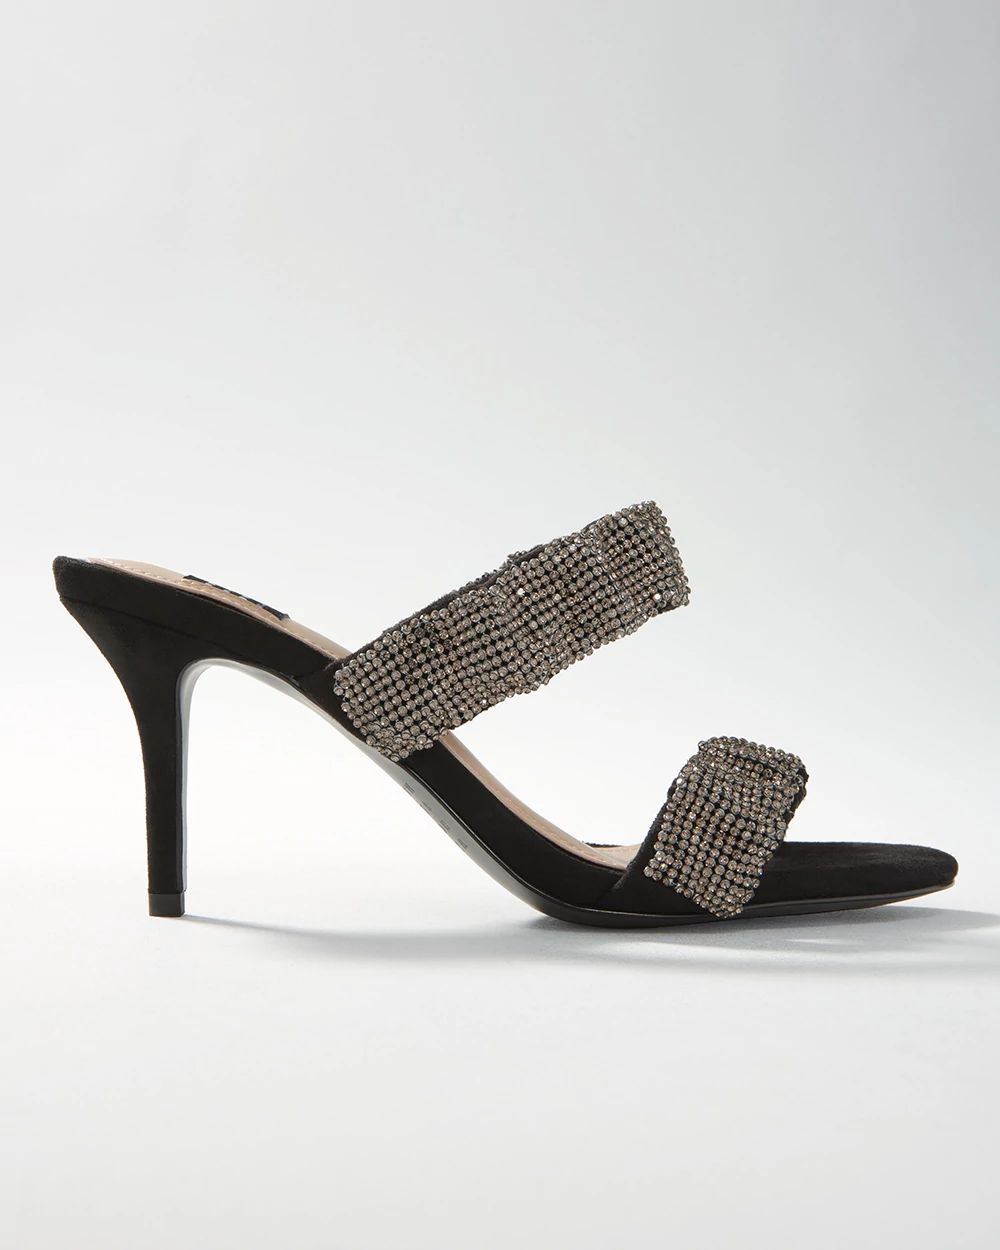 Hematite Strap Mid-Heel Slides click to view larger image.